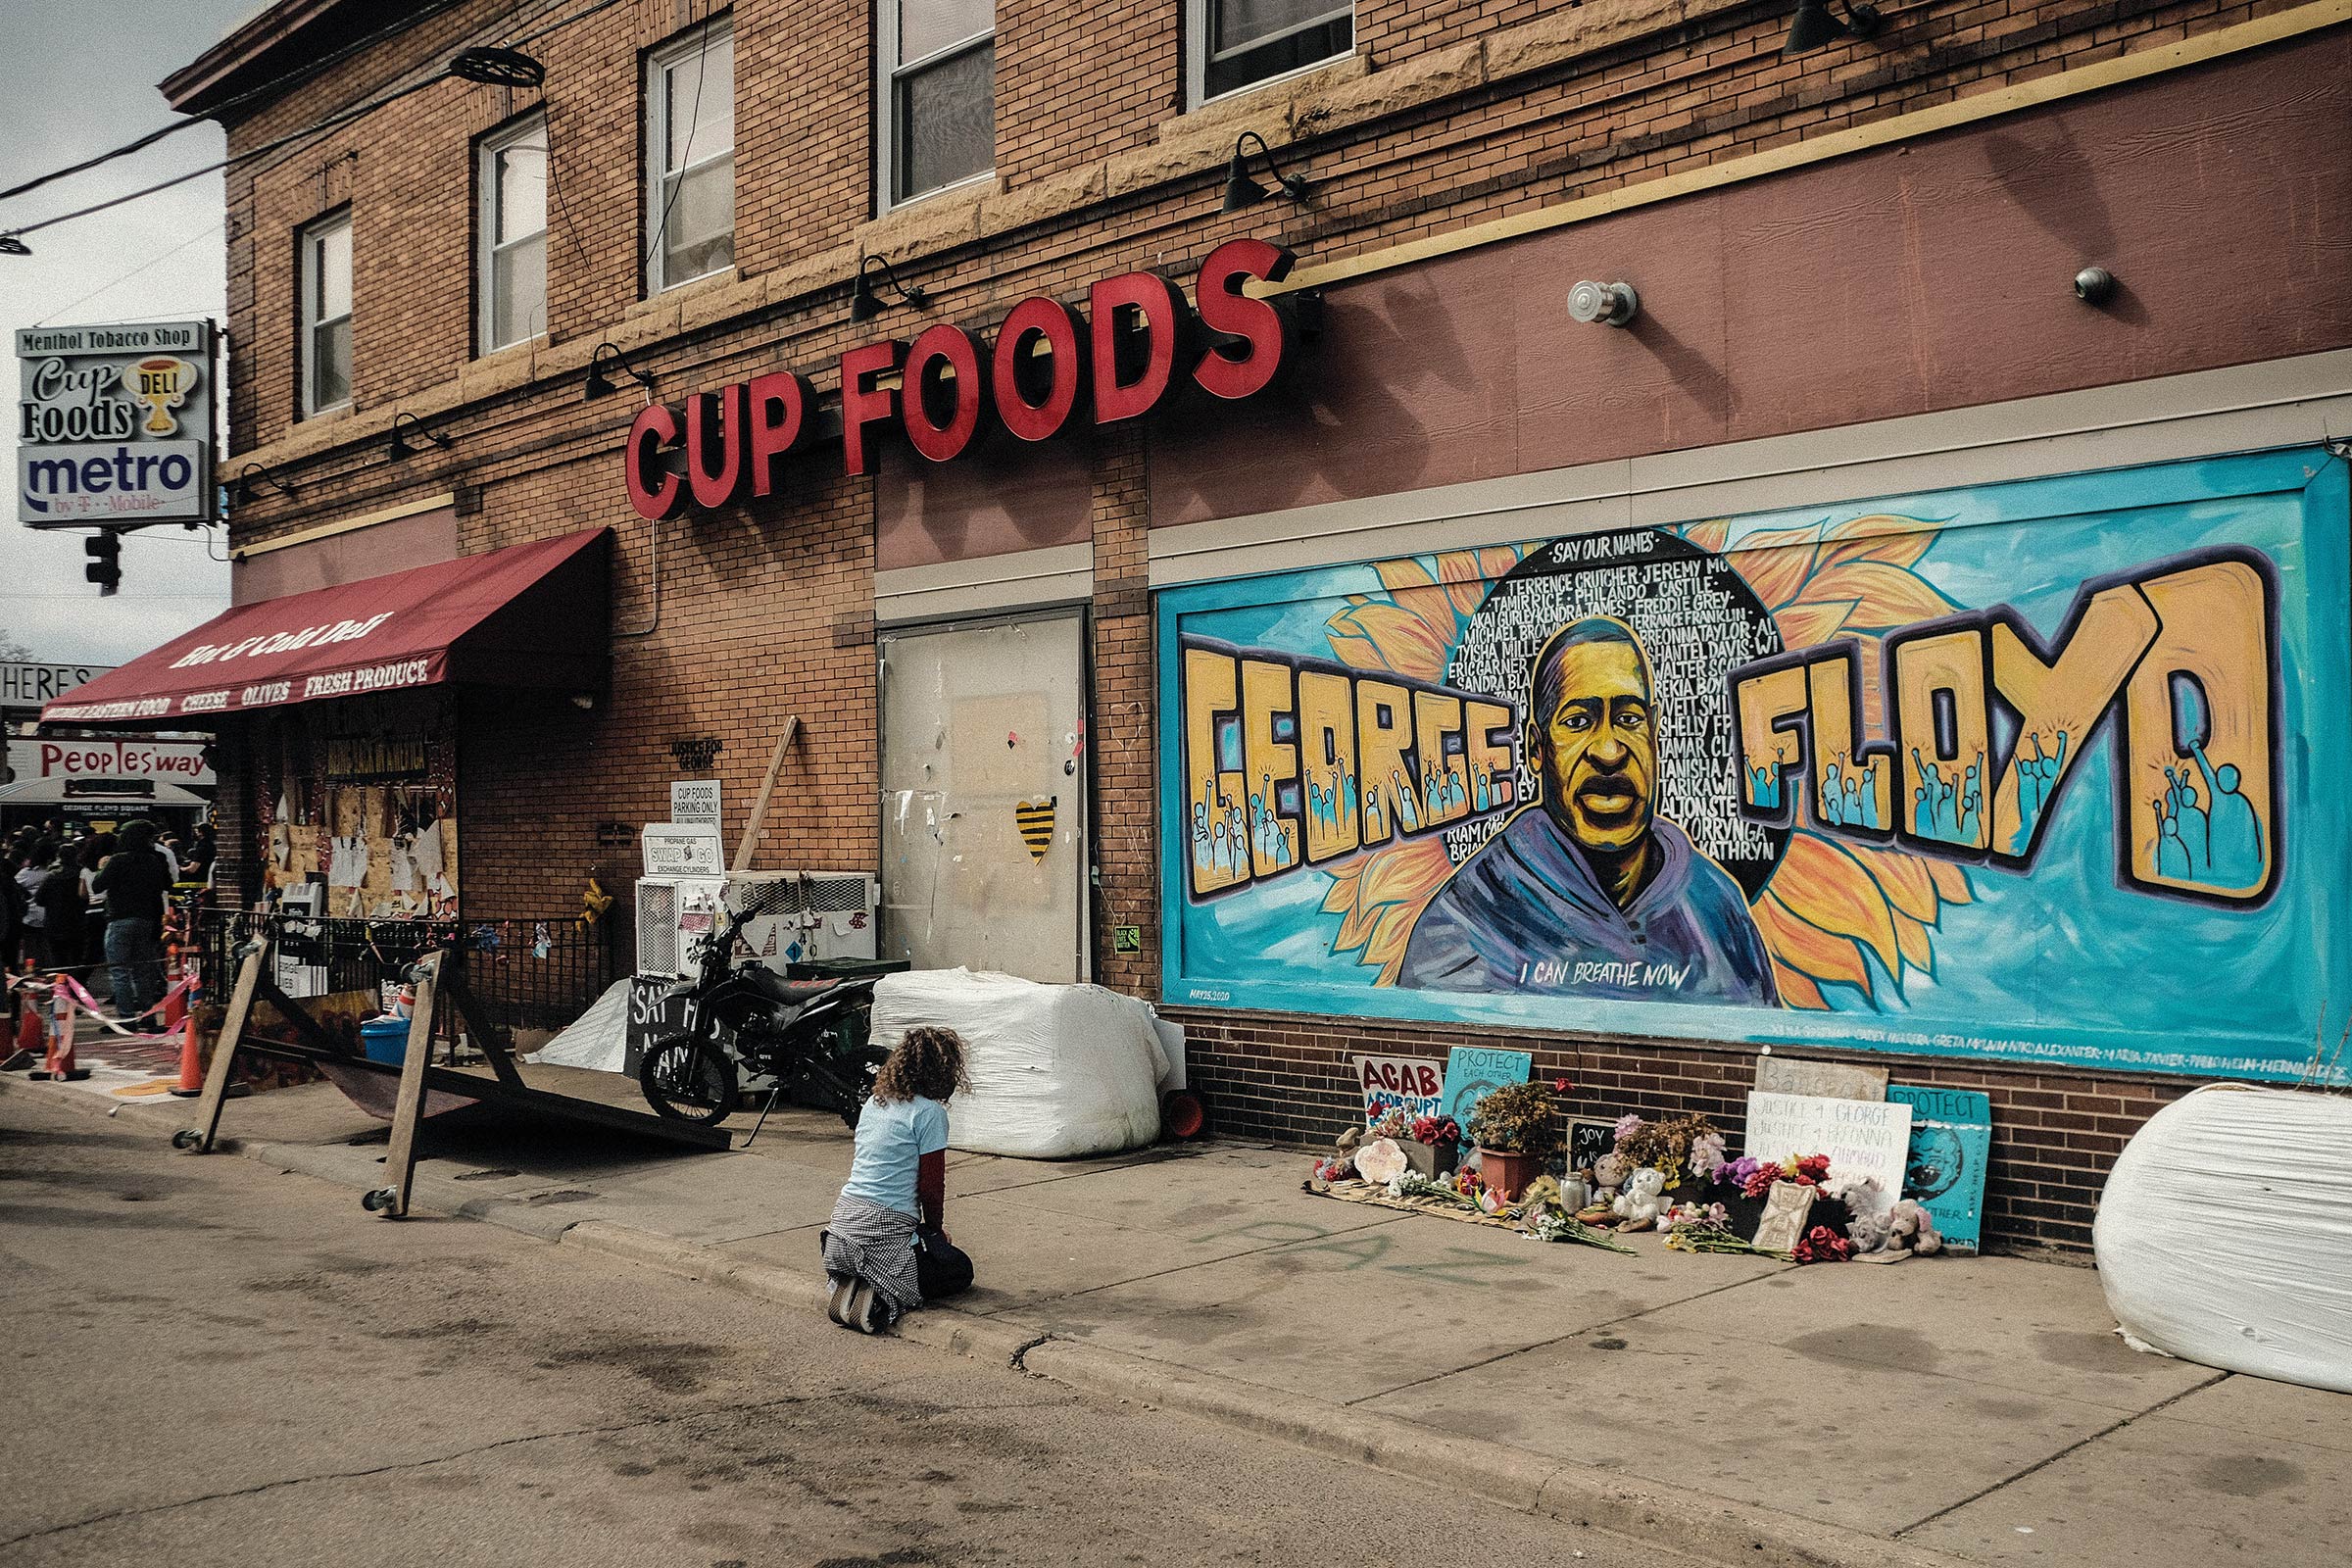 A woman pays respect to a mural of Floyd by the Cup Foods where he was murdered. (Matthew Hatcher—SOPA Images/LightRocket/Getty Images)